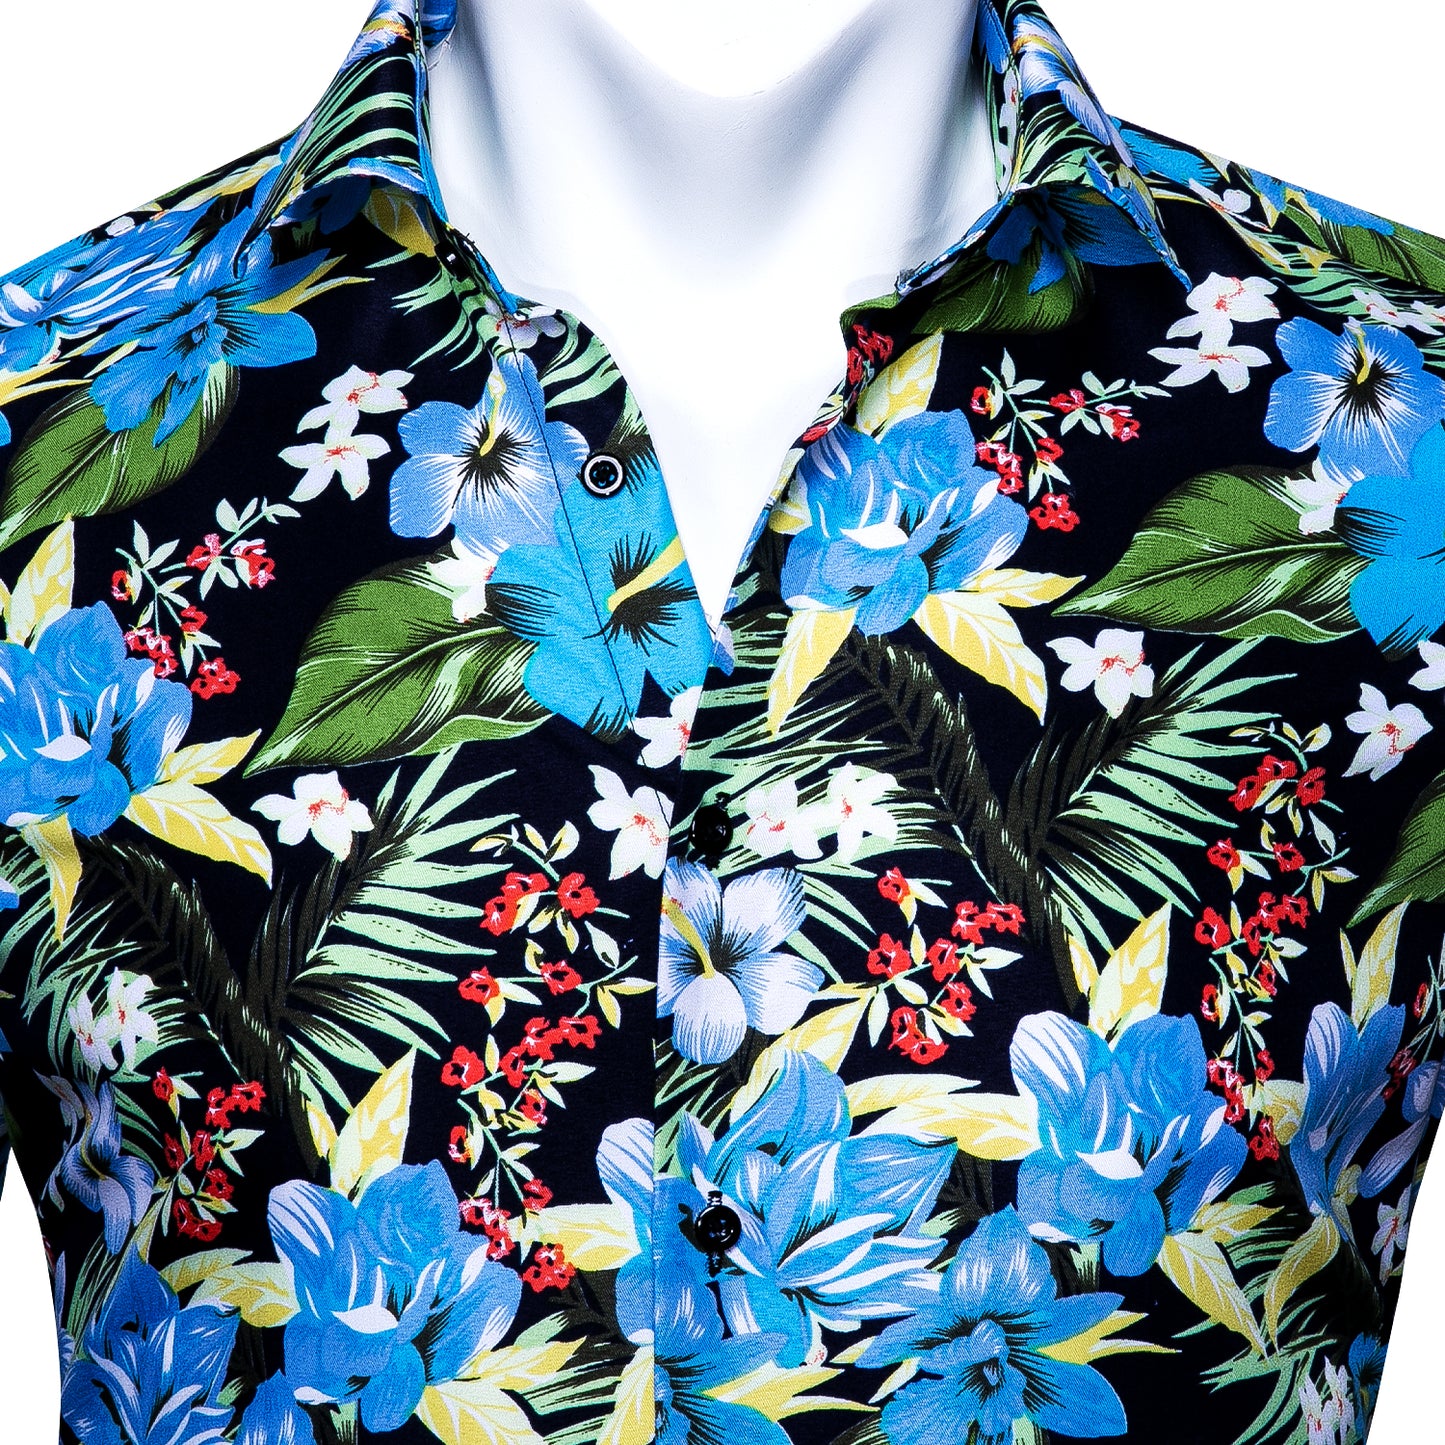 Novelty Printed Shirt - Icy Lilly